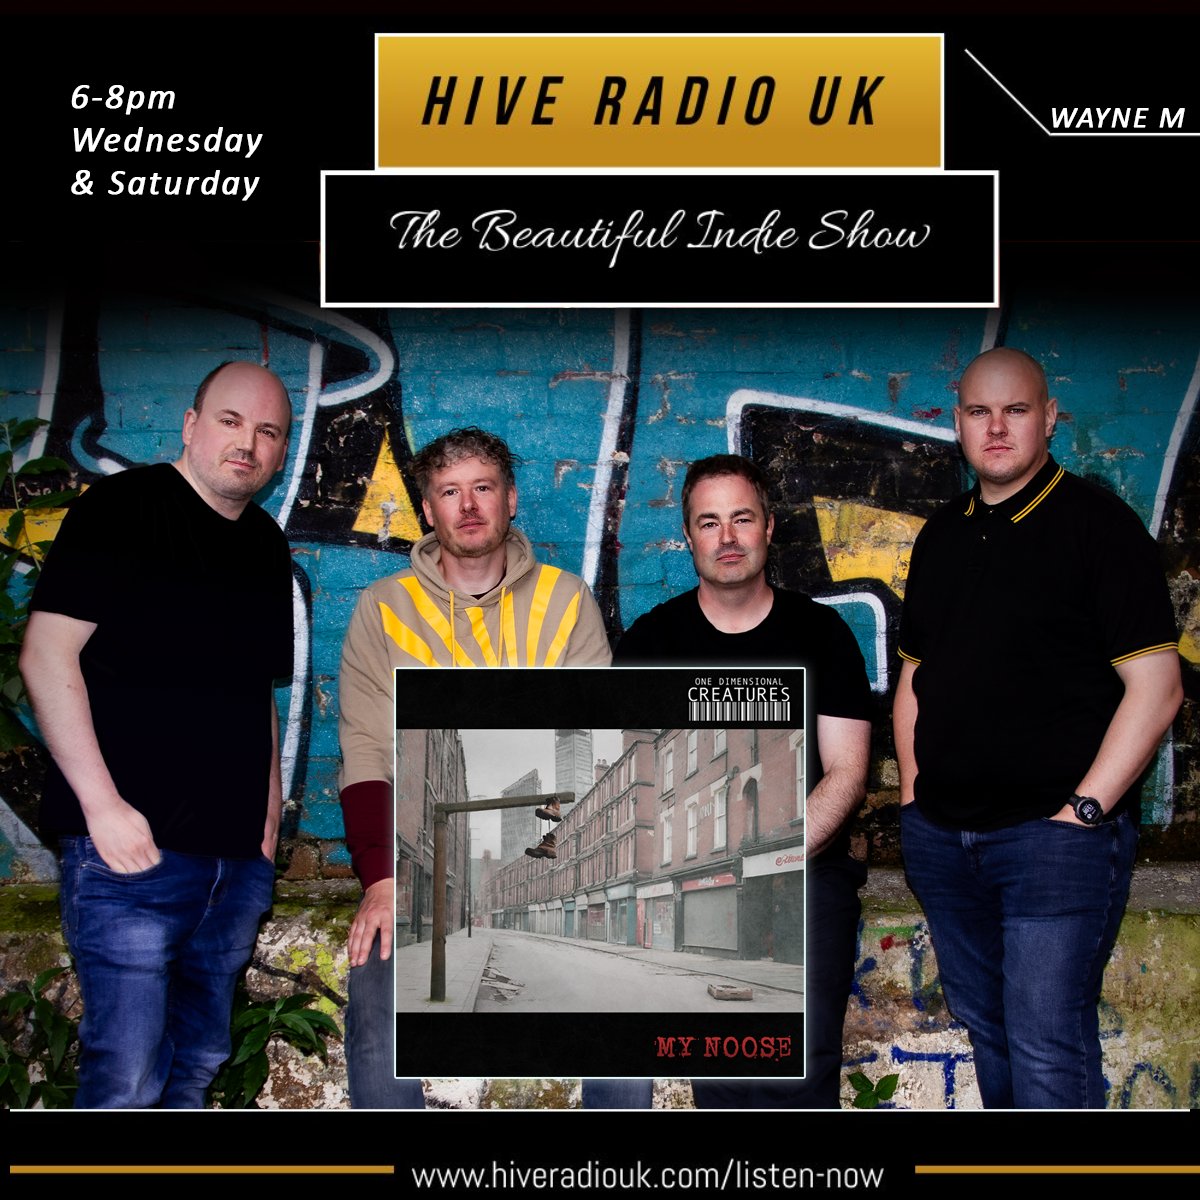 Massive thanks to @hiveradiouk & Wayne Moseley for giving our new single 'My Noose' a spin on The Beautiful Indie Show in Feb🙏 You can listen to the show now on the Hive Radio Mixcloud: mixcloud.com/HiveRadioUK/hi…🔥 #rock #newmusic #radioshow #punkrock #alternativerock #rockmusic